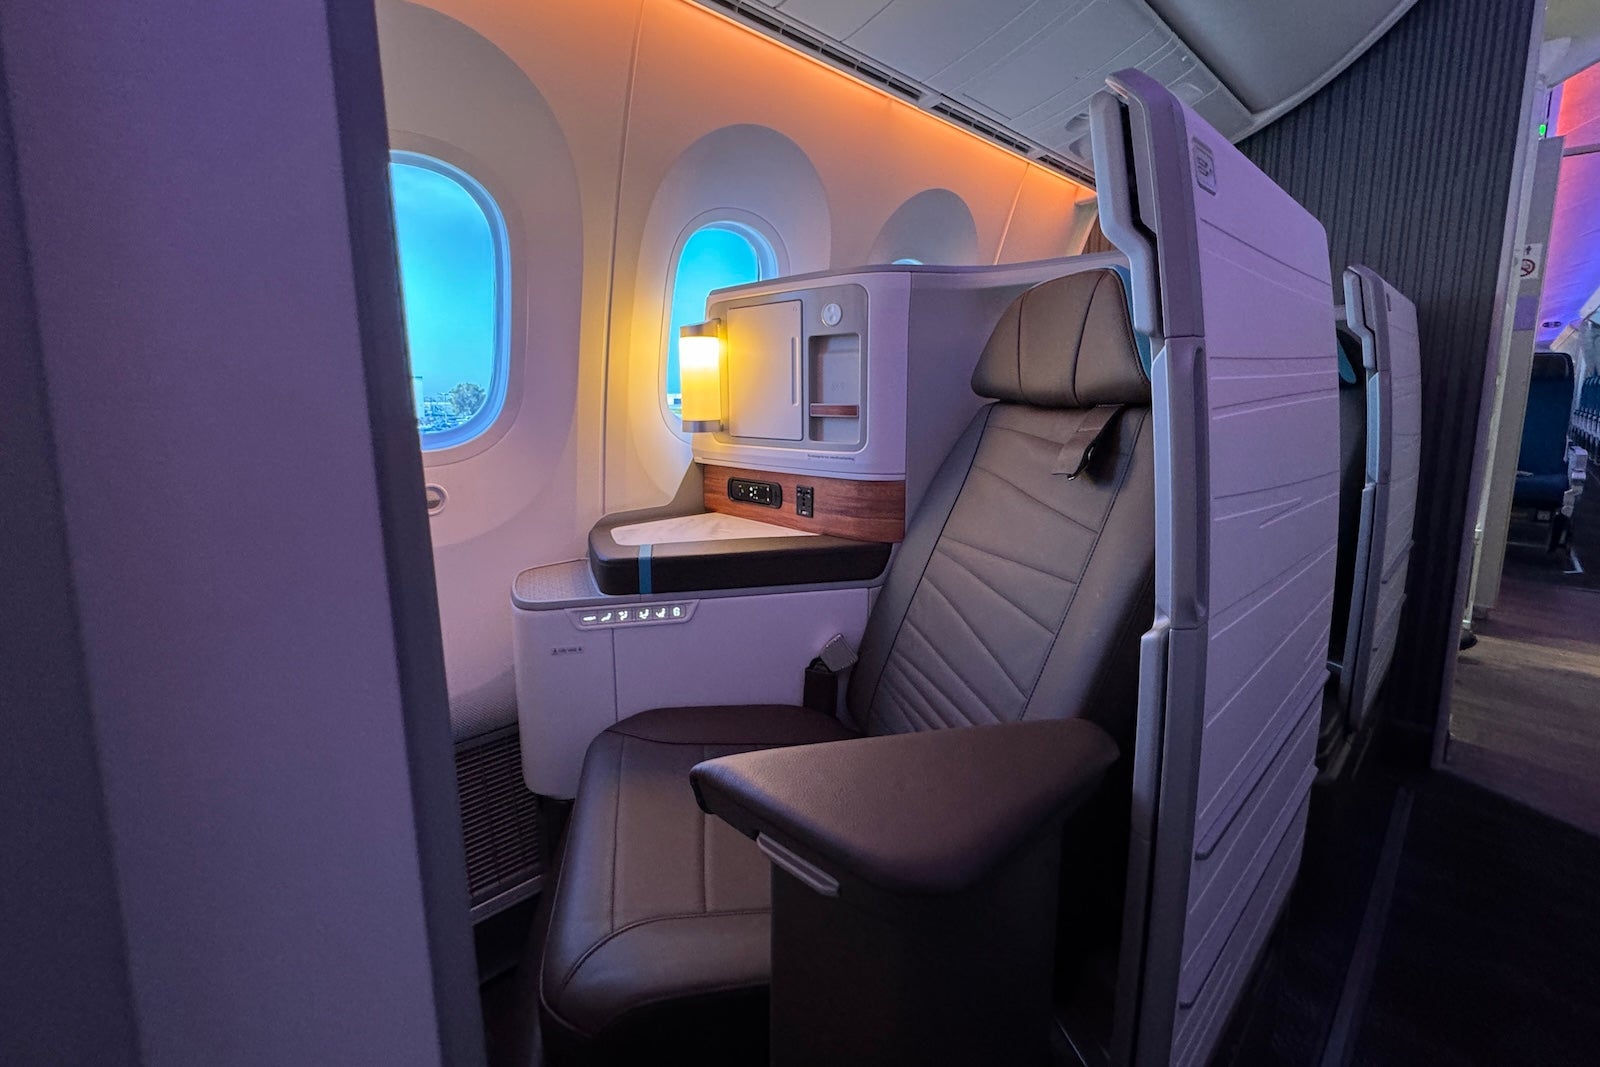 You are currently viewing Hawaiian Airlines Dreamliner sneak peek: New business class and economy cabins